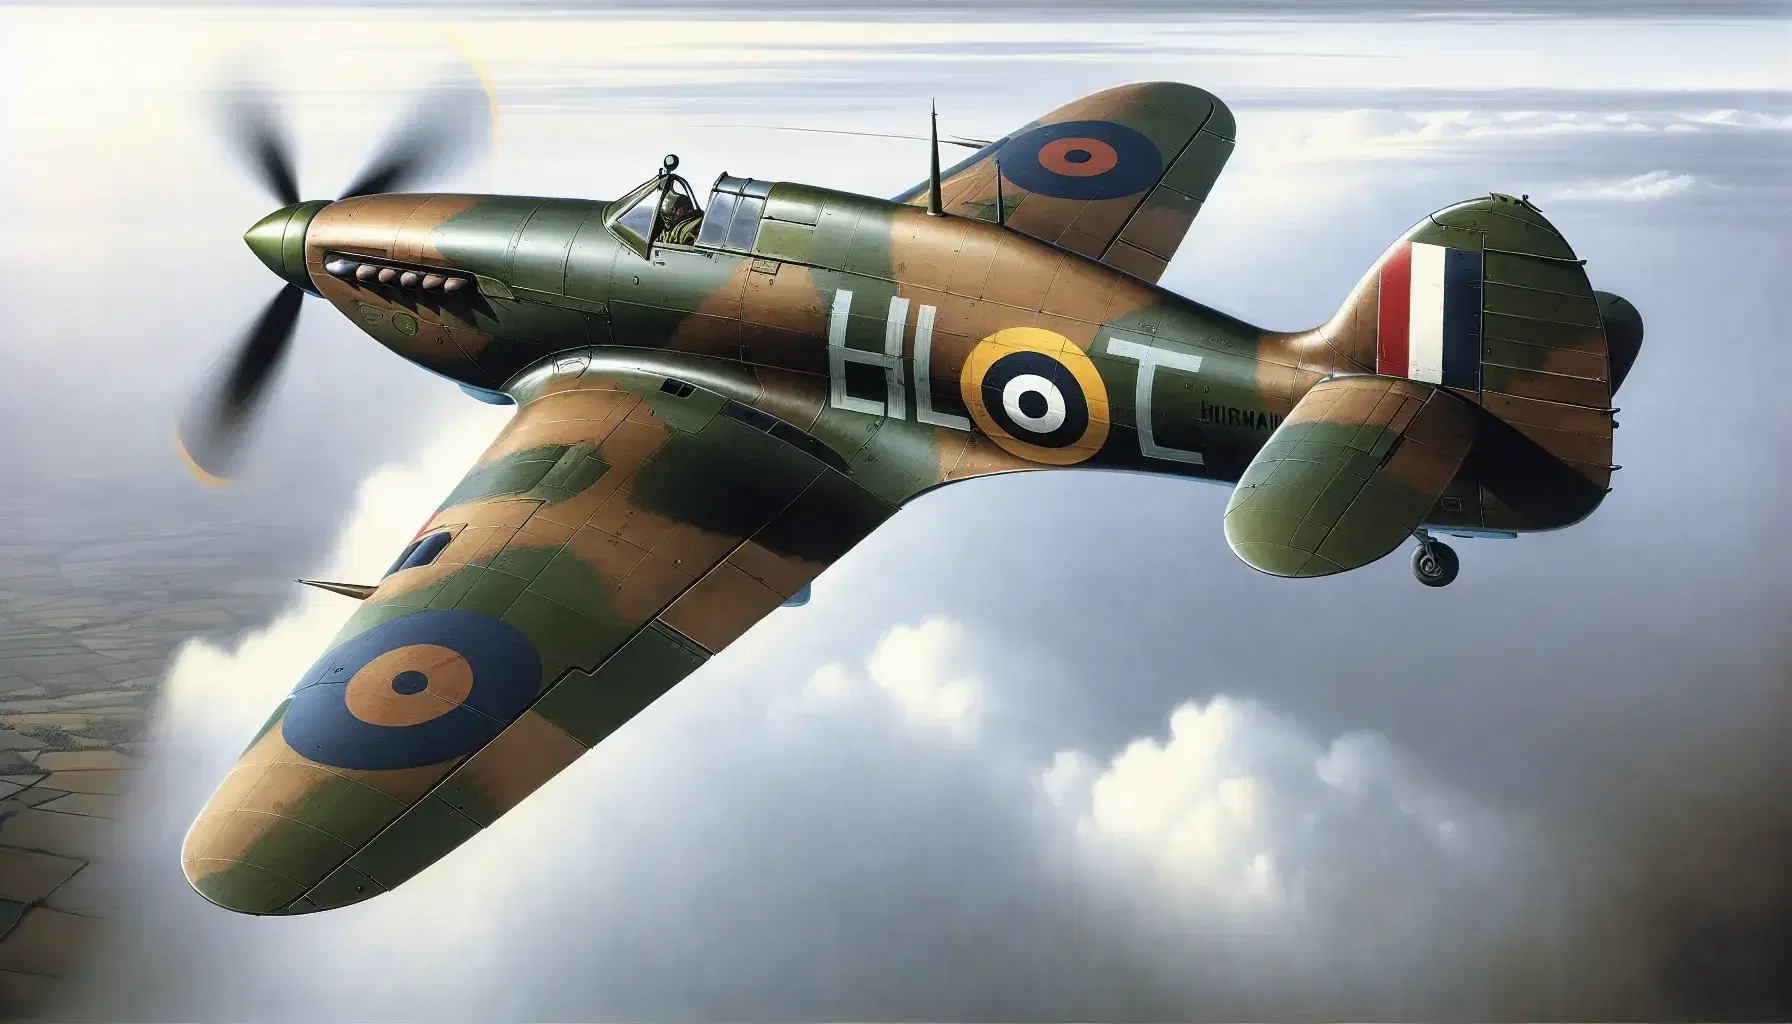 Hawker Hurricane fighter in flight with dark green and brown camouflage livery, sky blue belly, at high altitude on a cloudy background.